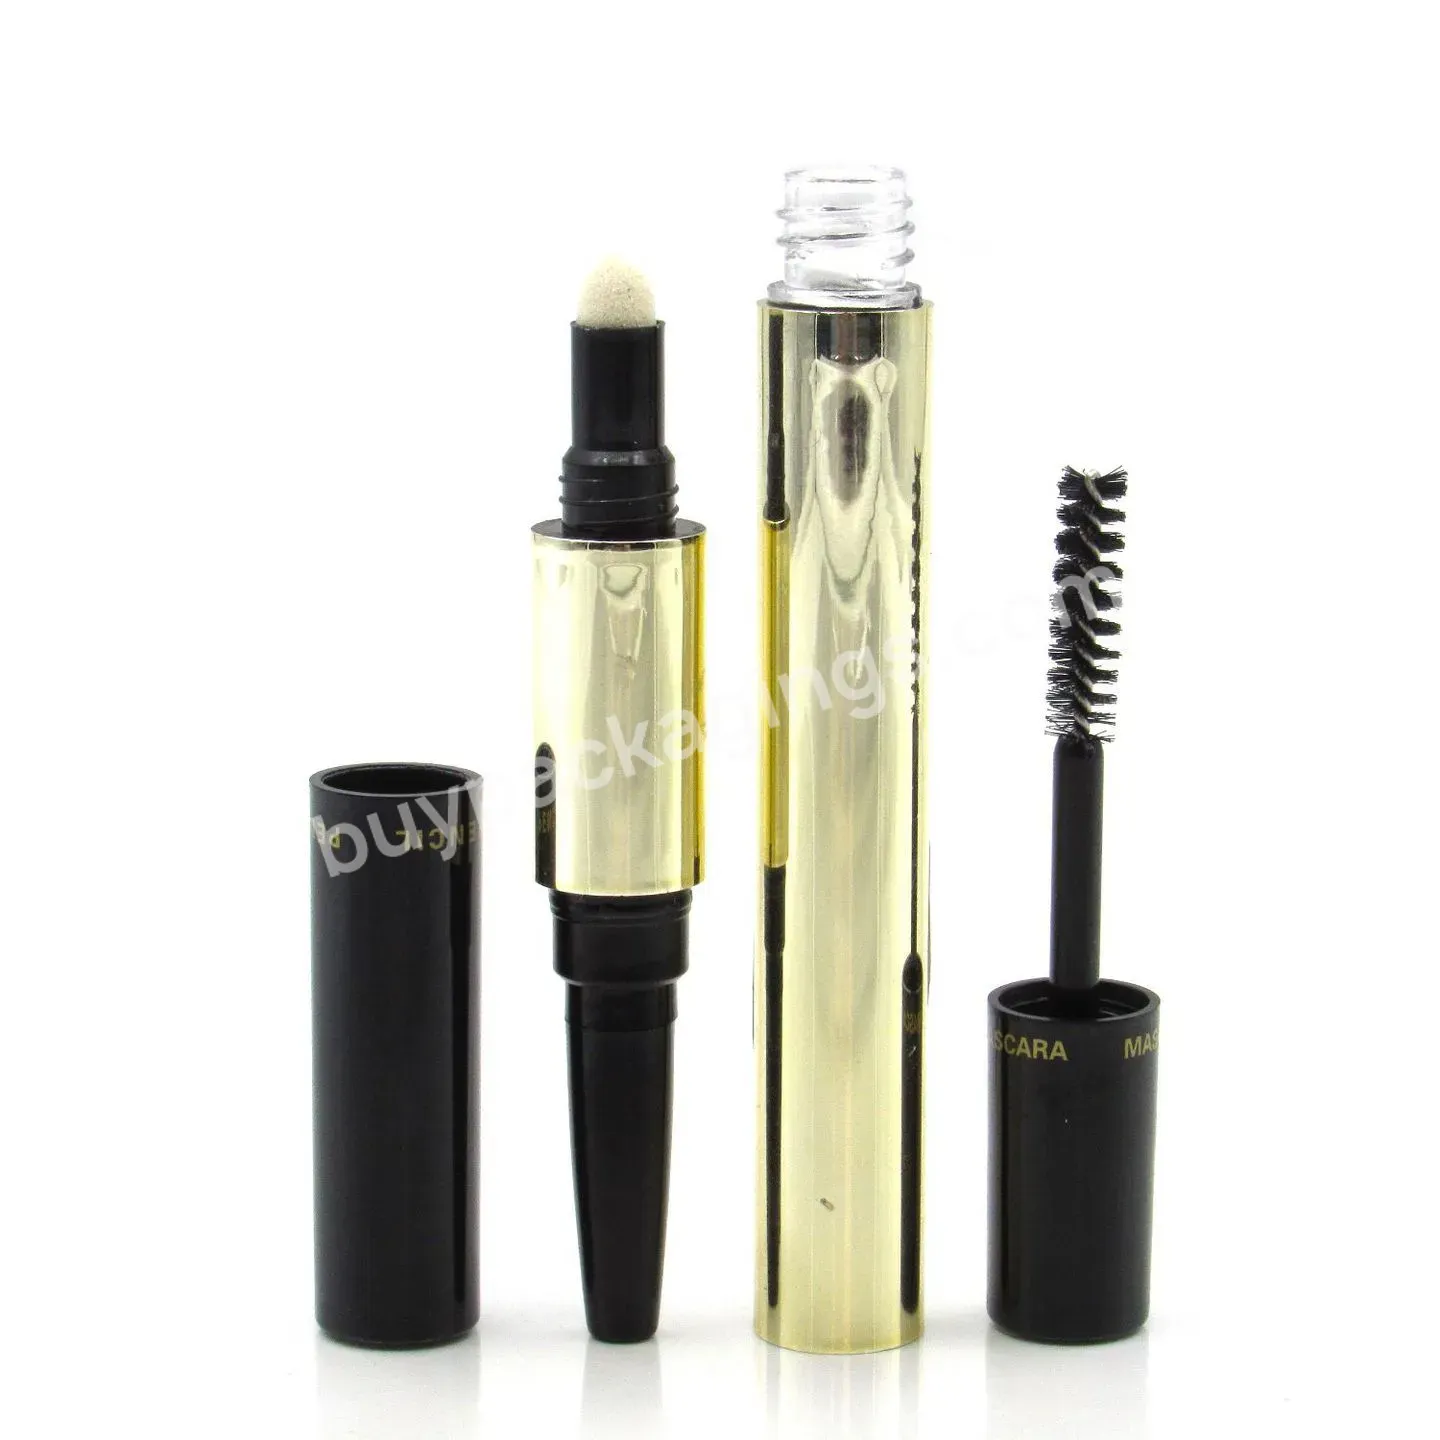 Private Label Customize Empty Container 3in1 Eyebrow Pencil Powder Brow Mascara Plastic Packaging Pencil Tube - Buy 3in1 Eyebrow Pencil Plastic Packaging,3in1 Eyebrow Pencil Empty Container,3in1 Eyebrow Pencil Powder Brow Mascara.